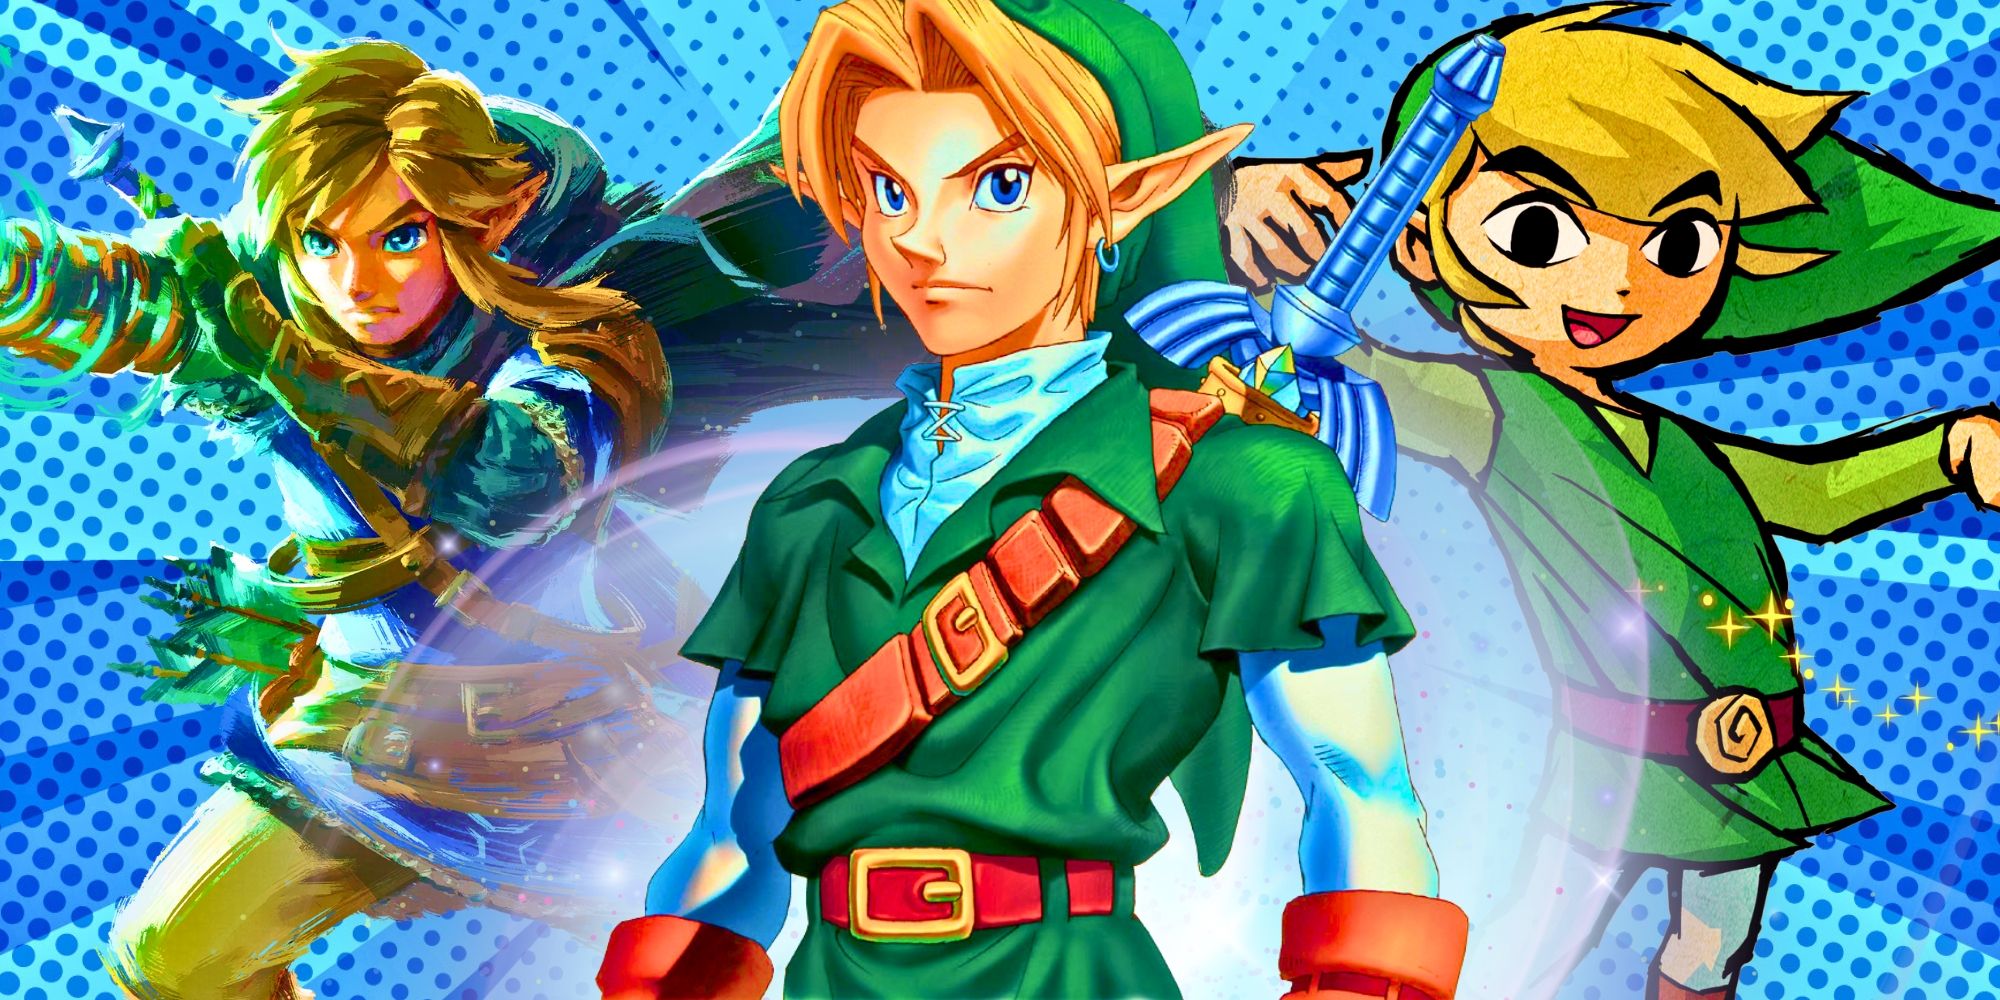 Images Of Link From Breath Of The Wild, The Wind Waker, And Ocarina Of Time